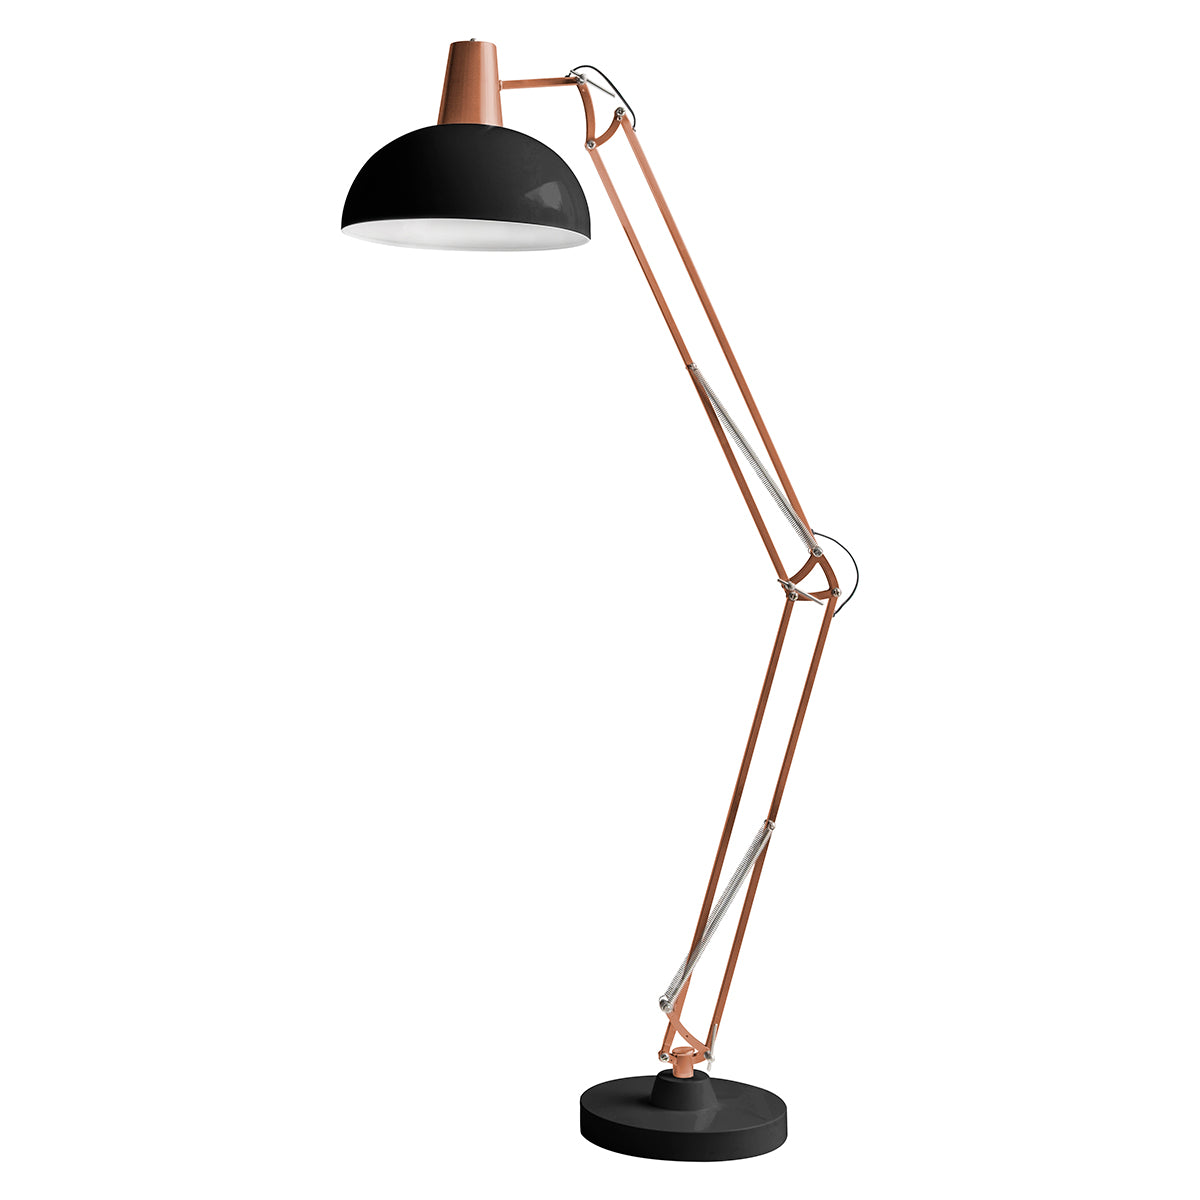 A bronze and black Marshall 1 Floor Light by Kikiathome.co.uk, perfect for interior decor, showcased on a white background.